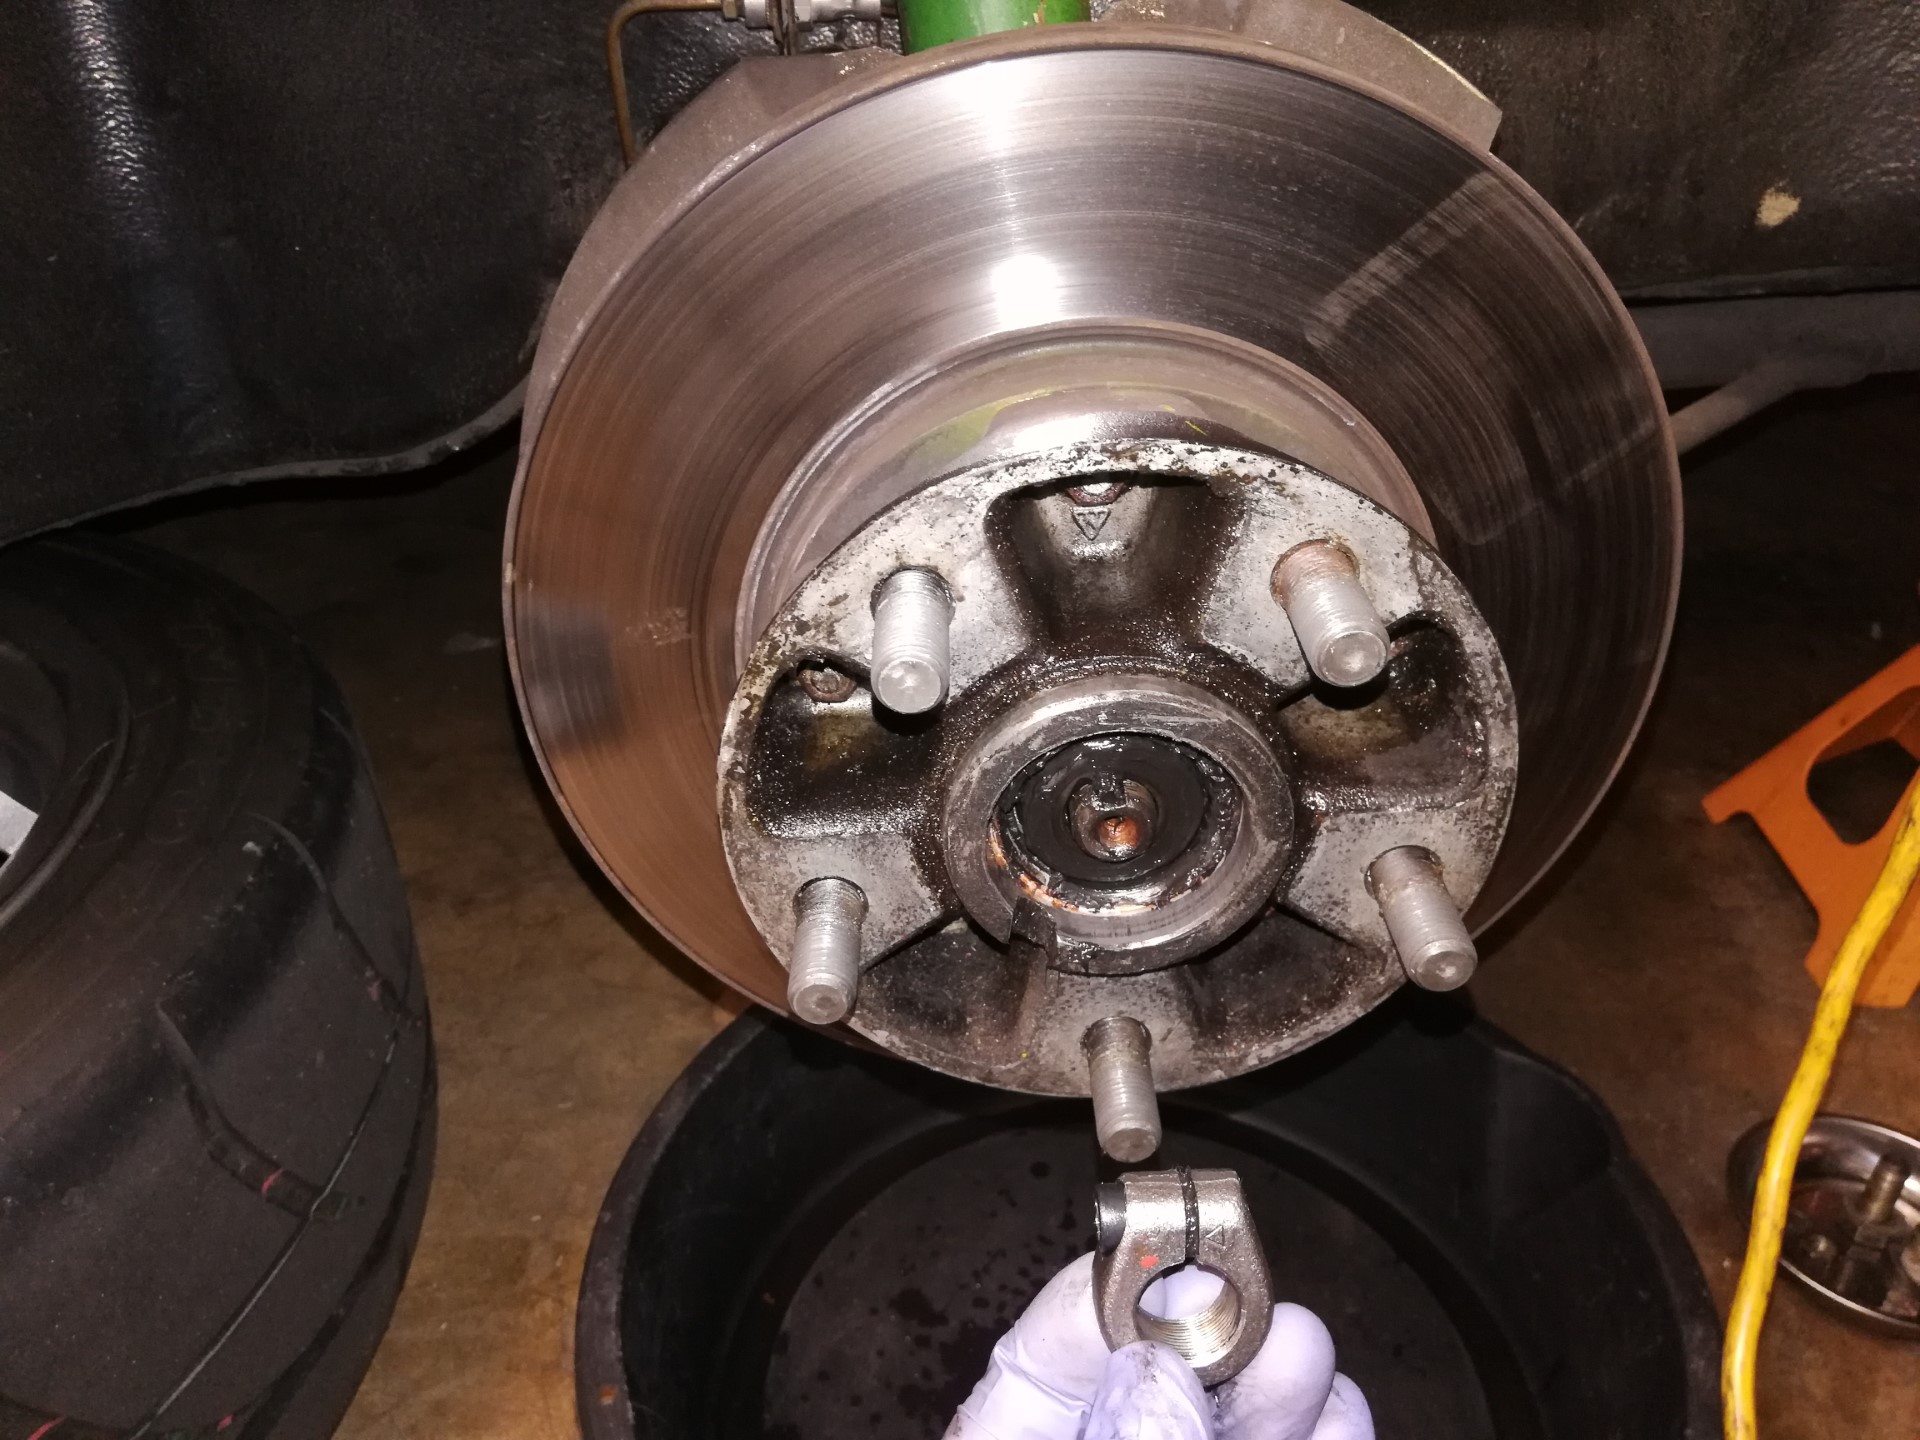 Air-cooled Porsche 911 front wheel hub removal